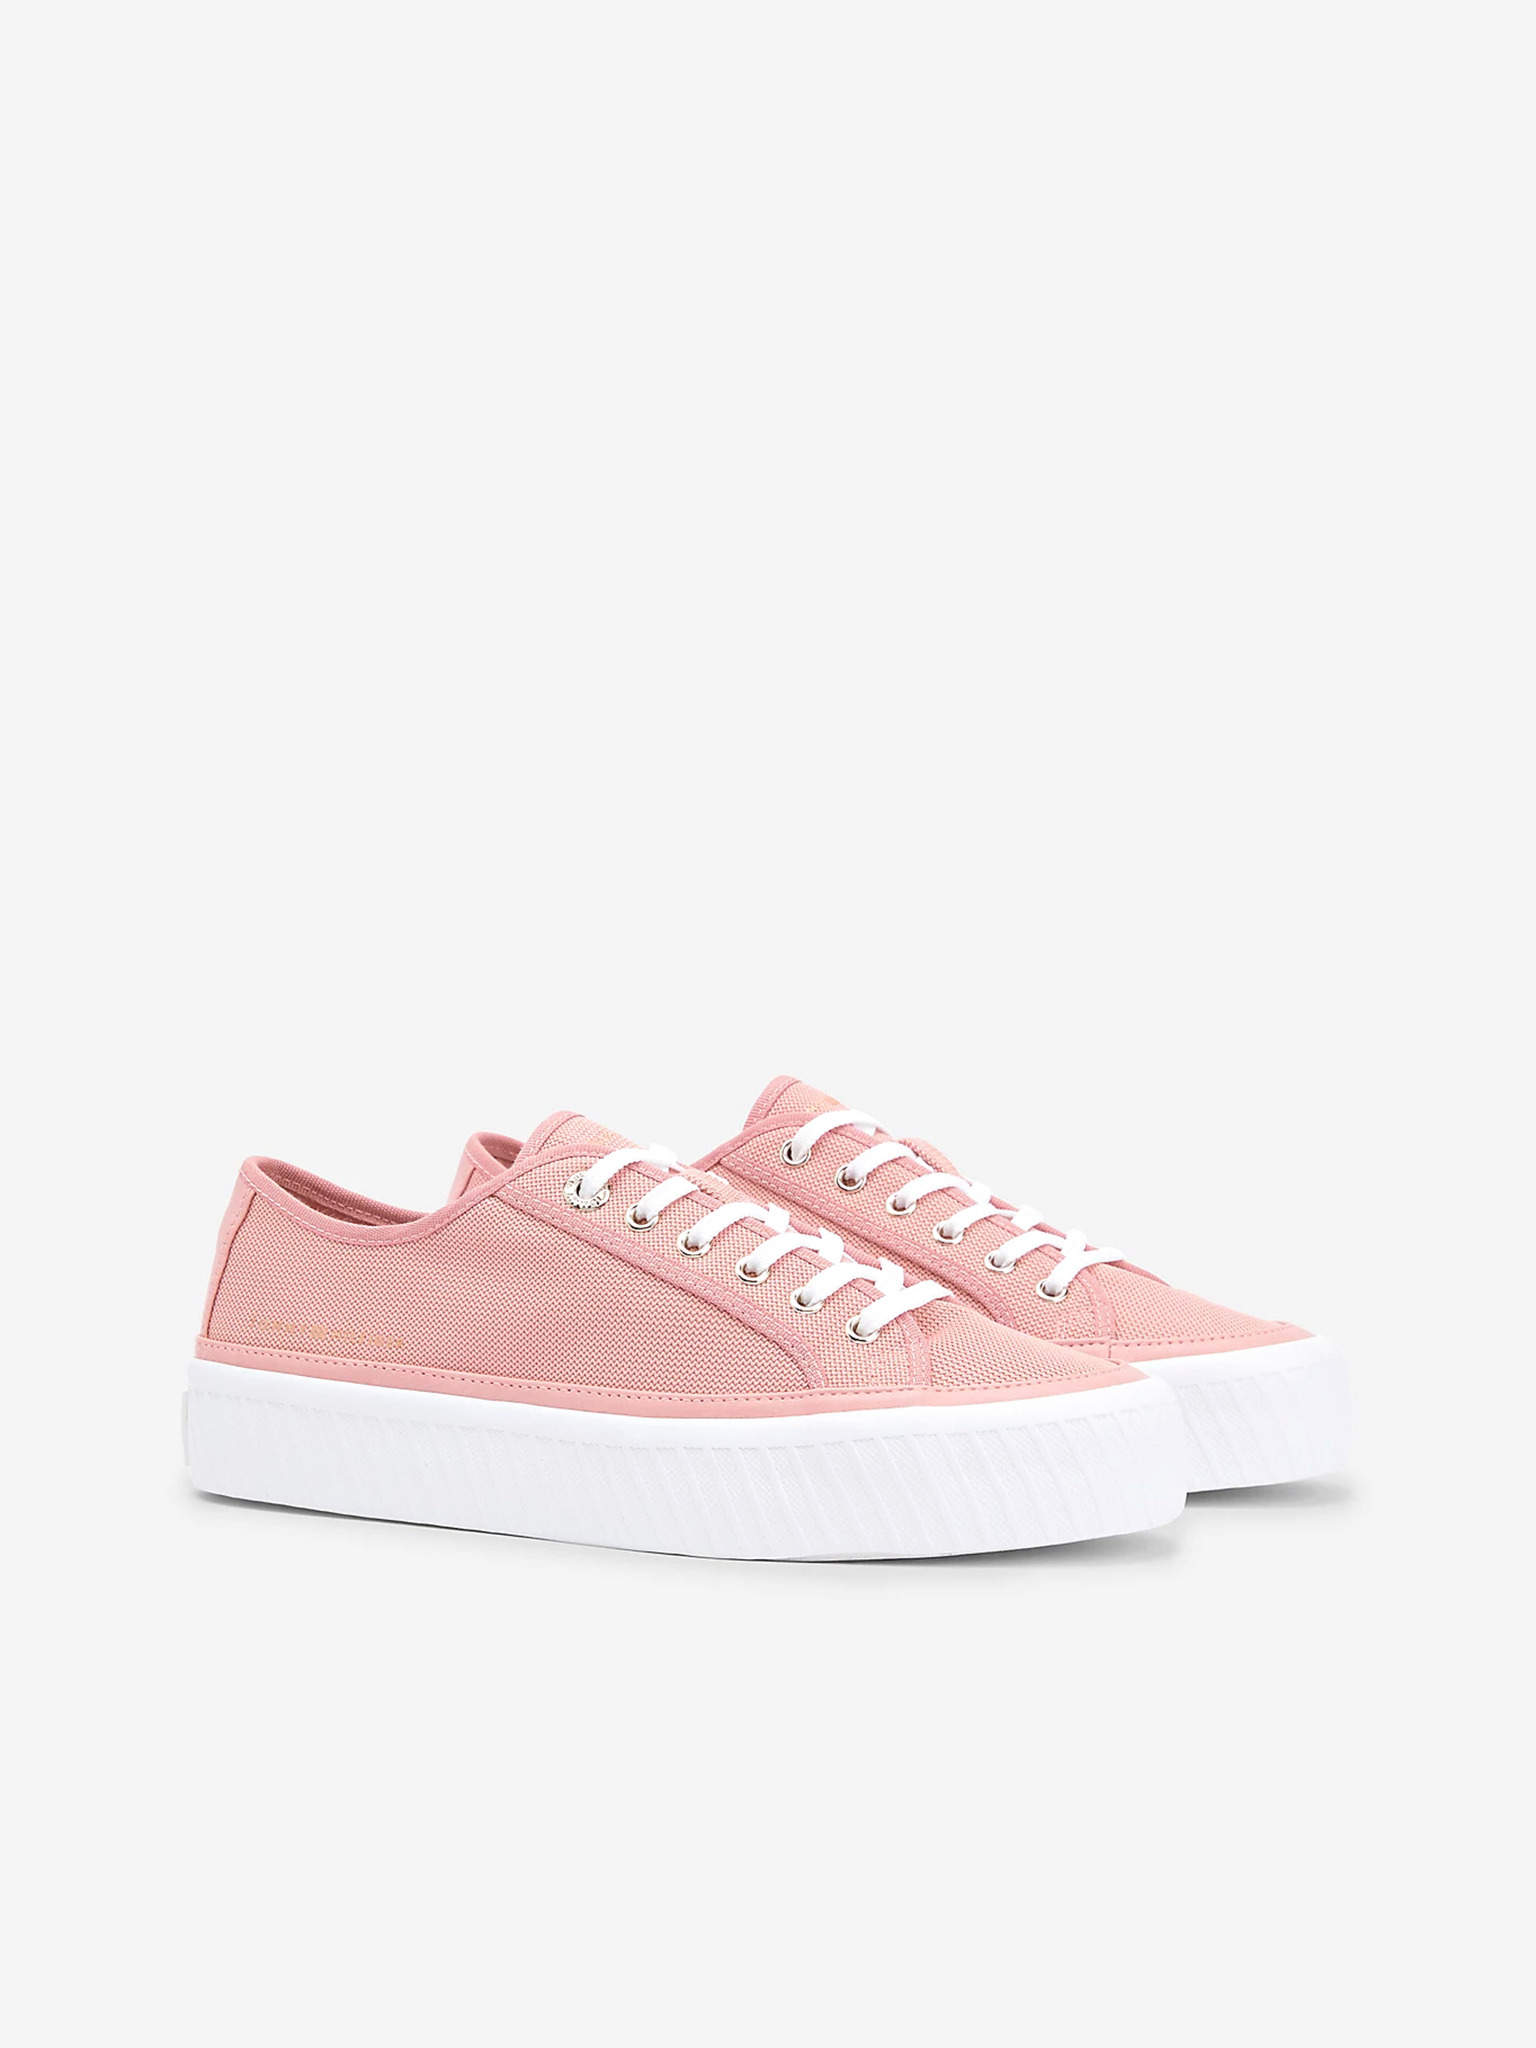 Extra Sneakers - Pink - 6 / Pink